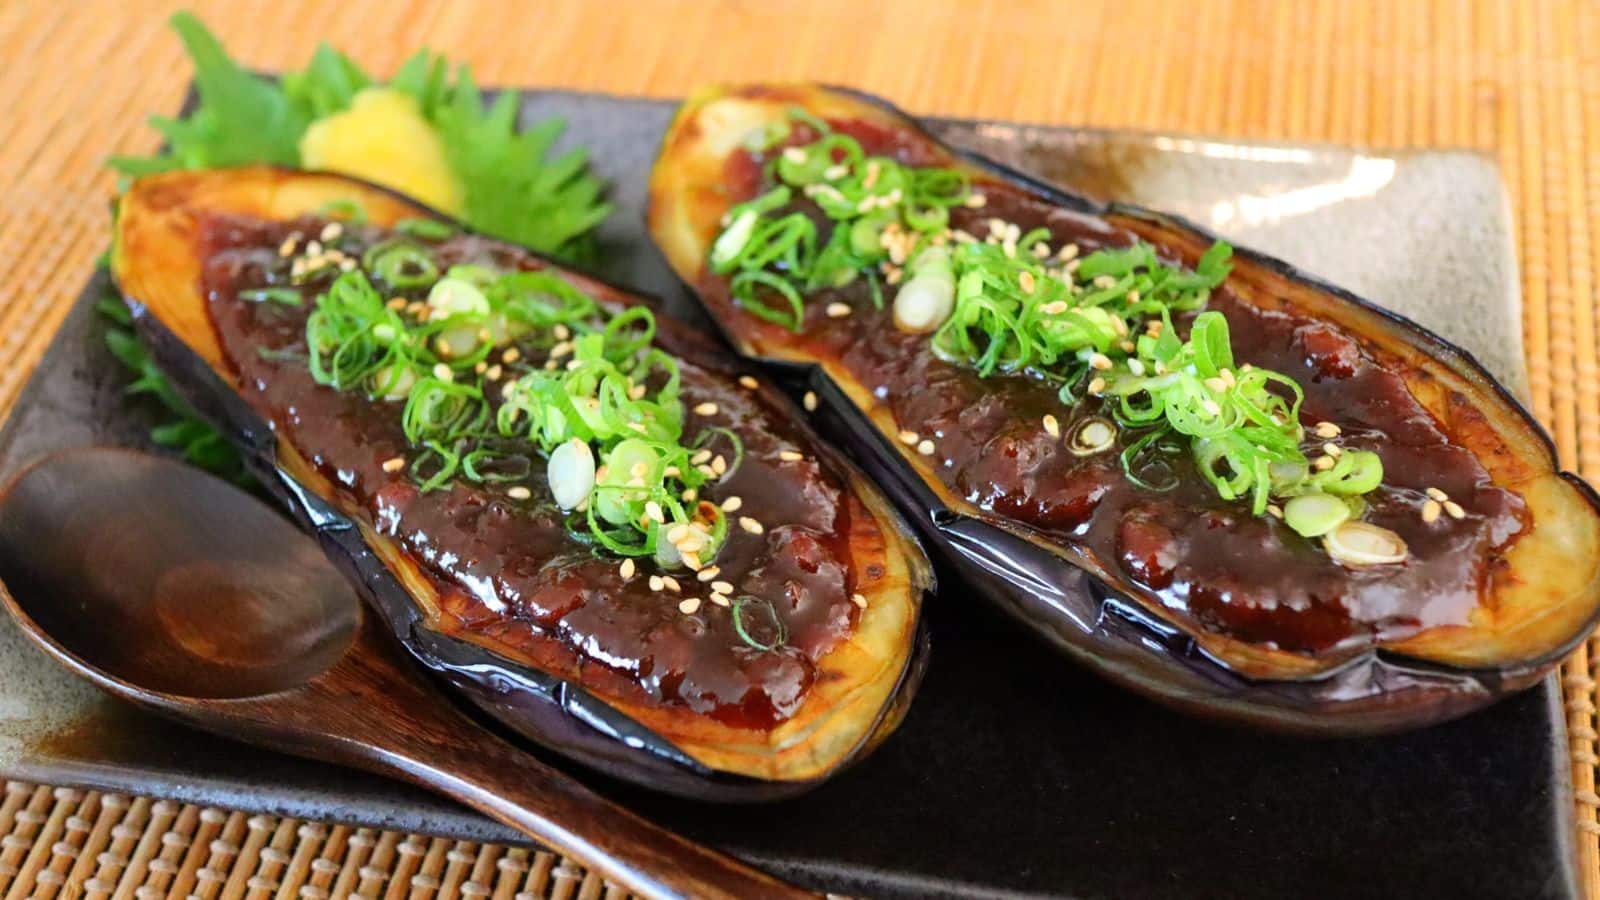 Japan on your plate: Try this miso aubergine recipe